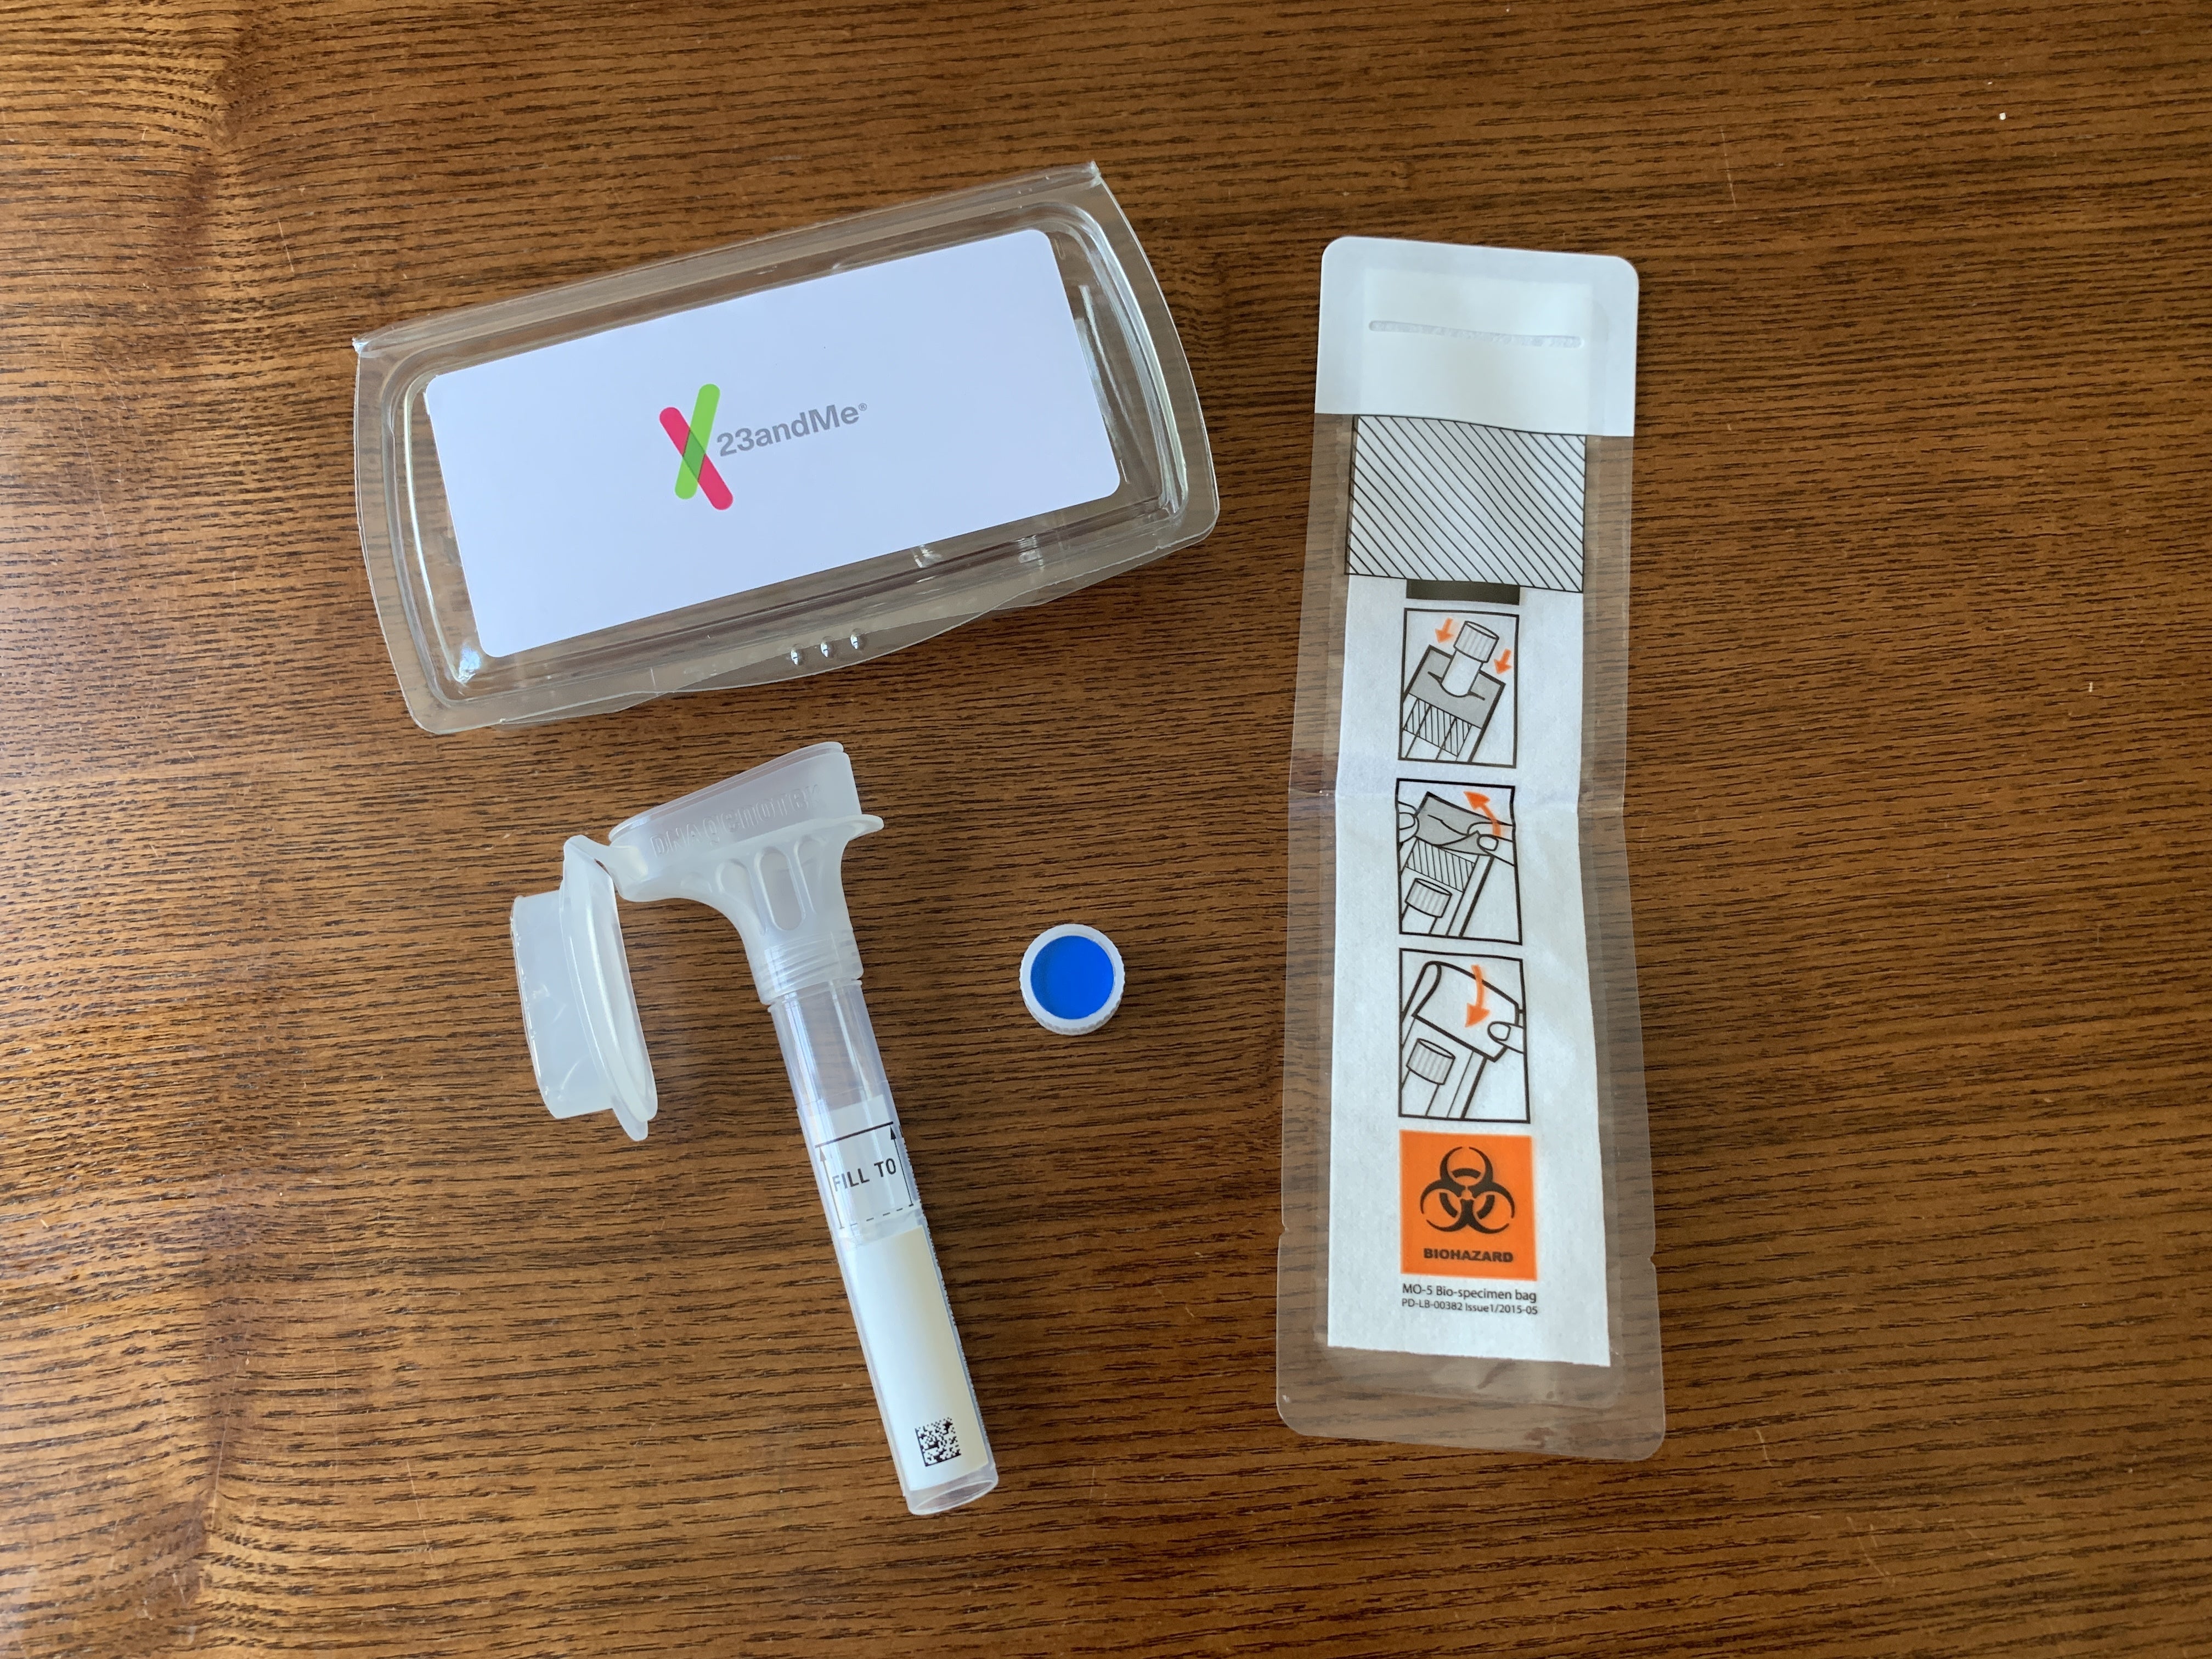  23andMe Health Ancestry Review The Complete DNA Testing Package 